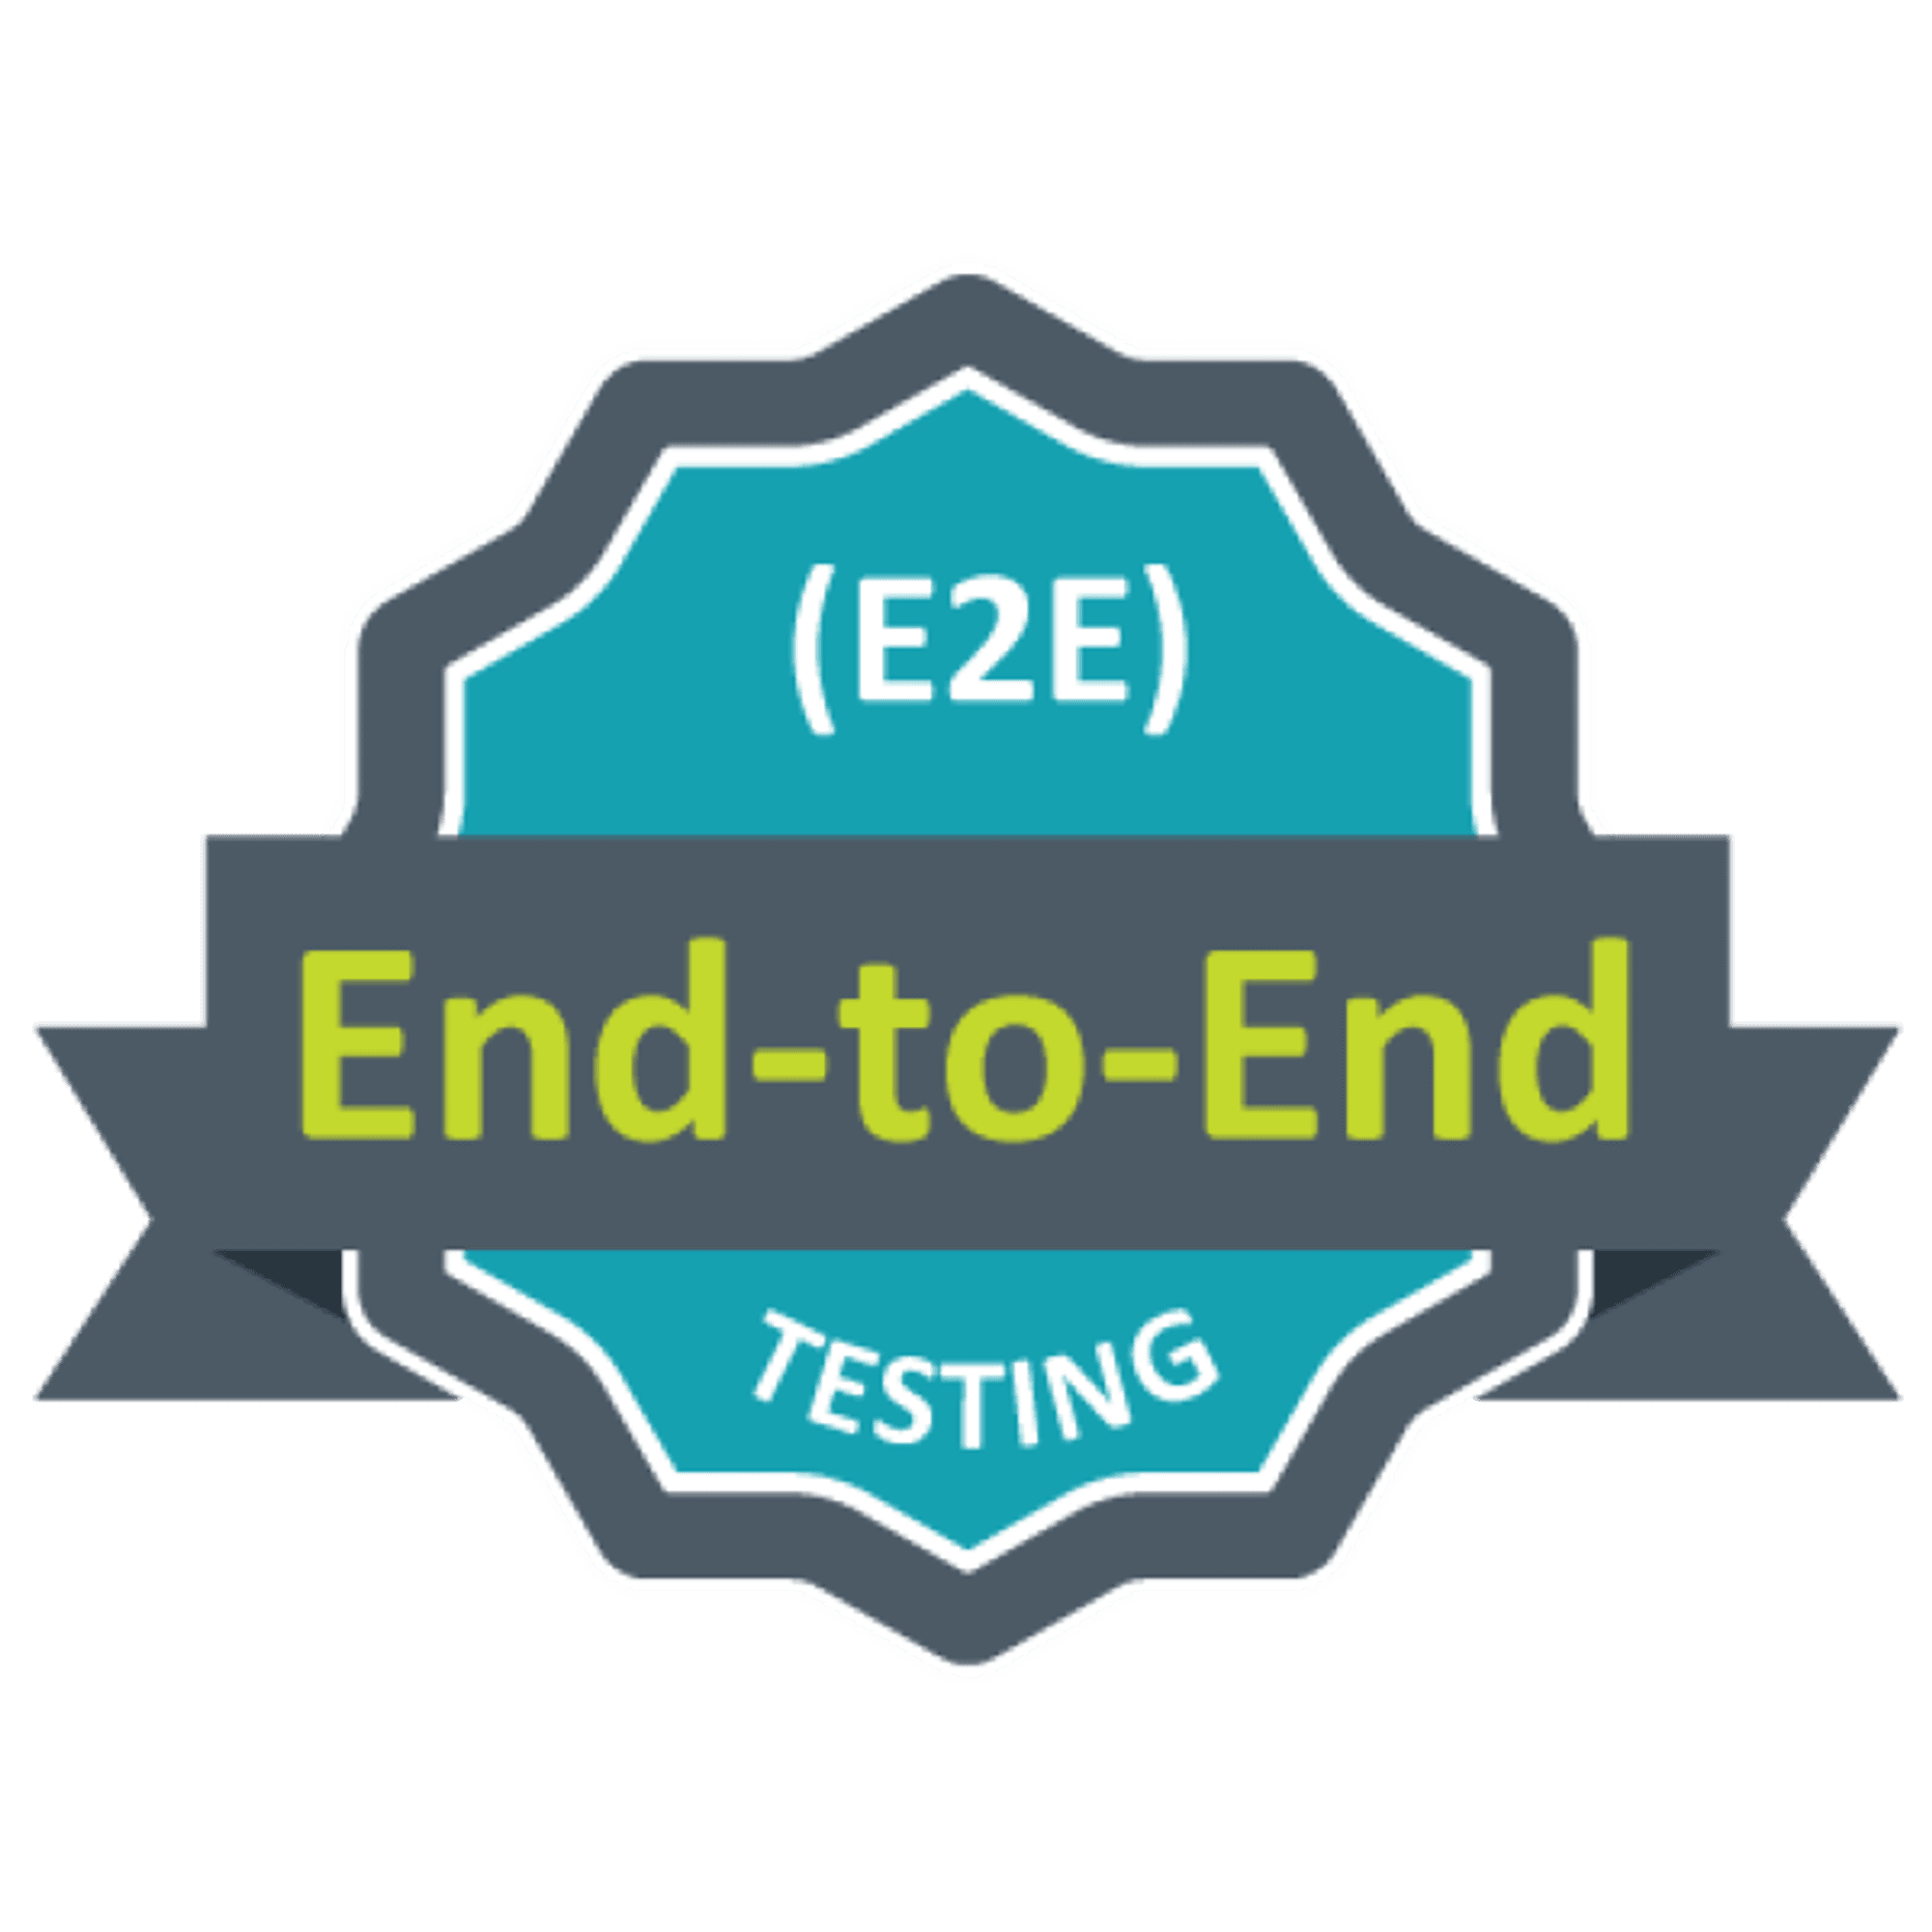 End to End Testing